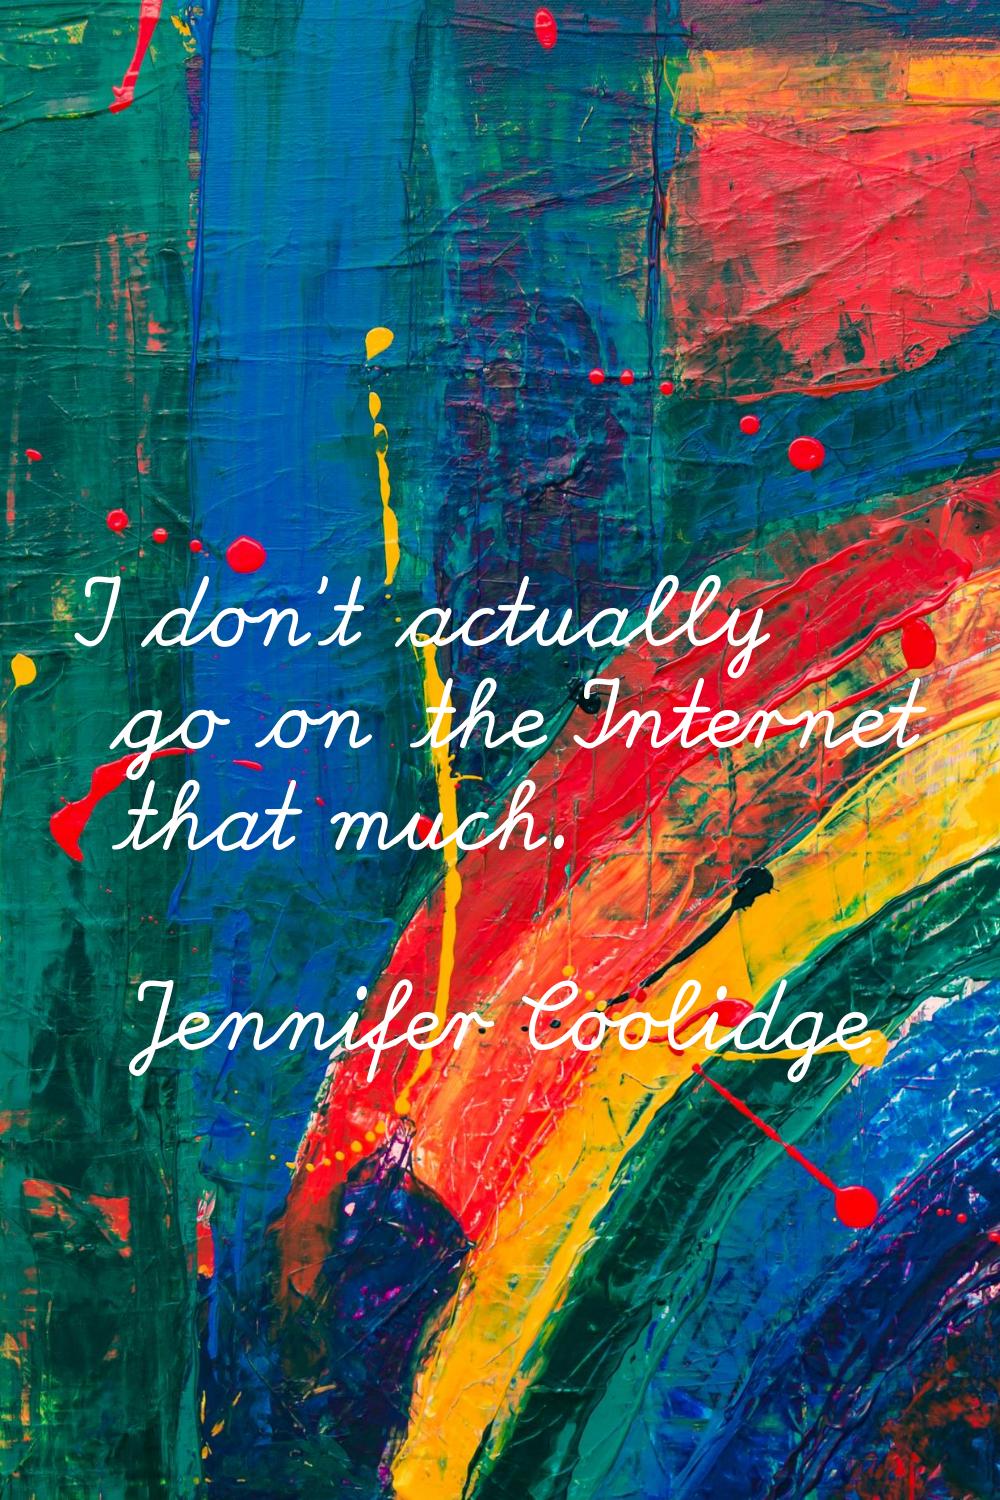 I don't actually go on the Internet that much.